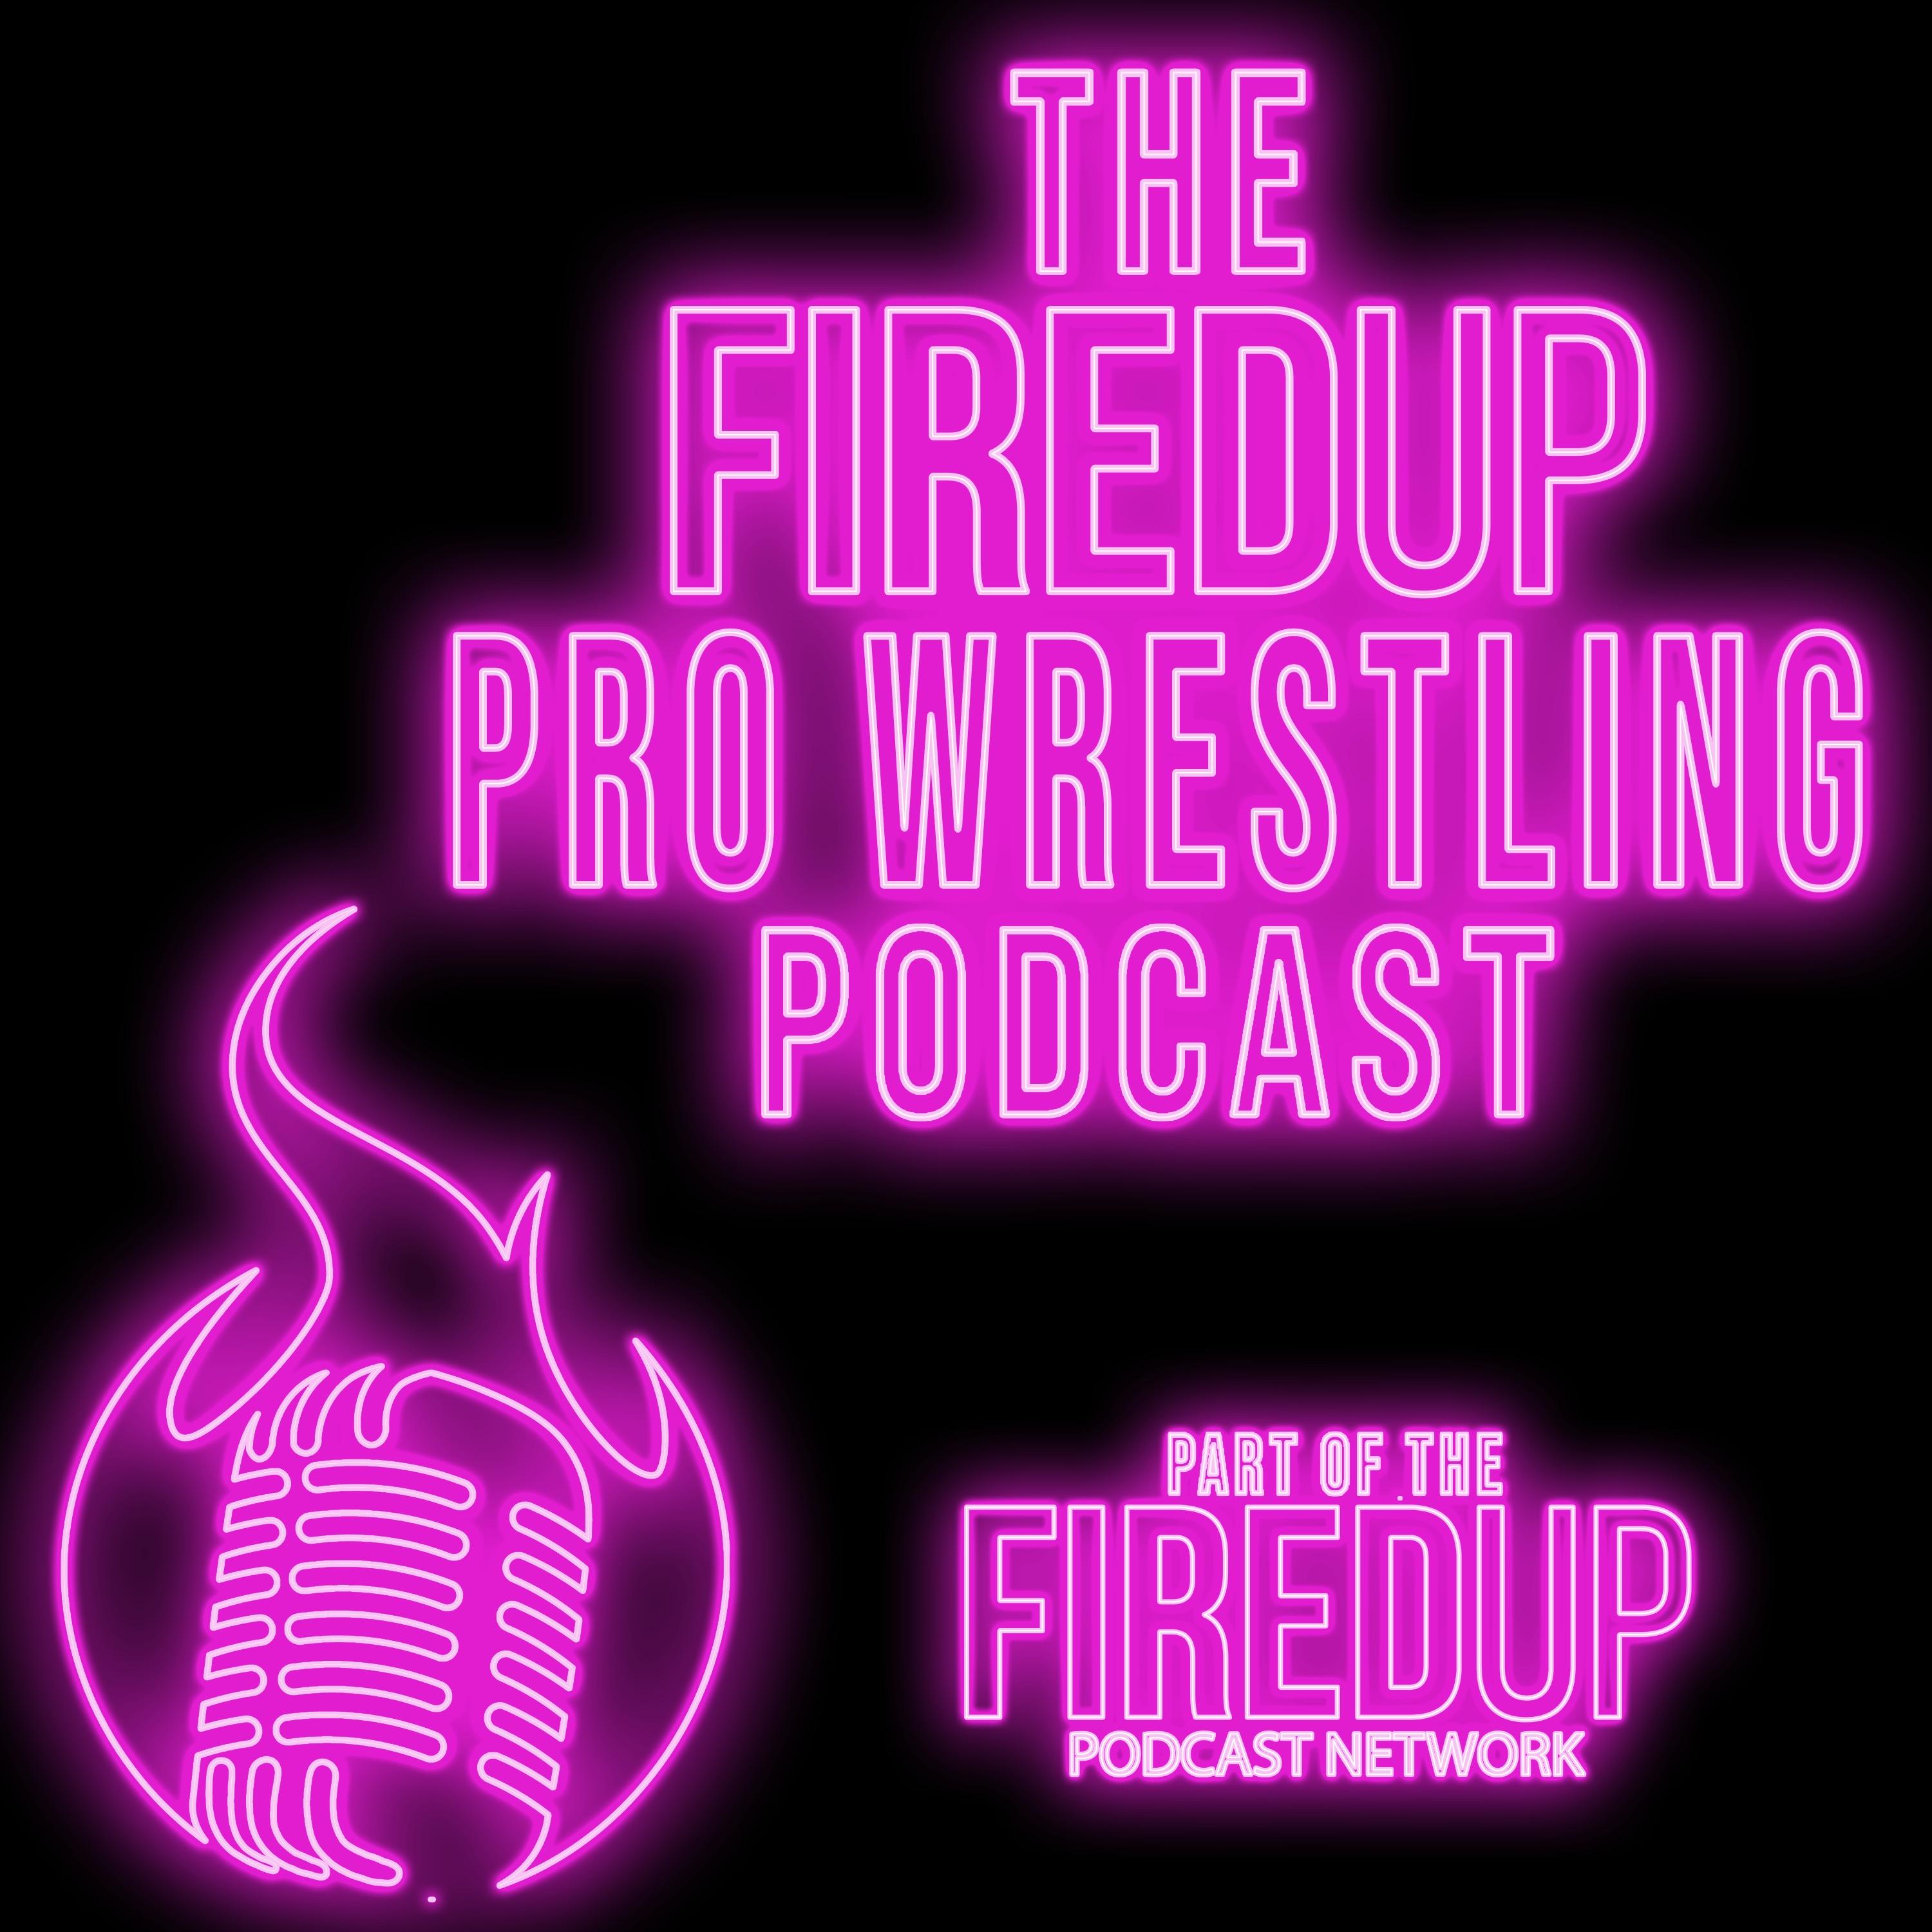 The Fired Up Pro Wrestling Podcast